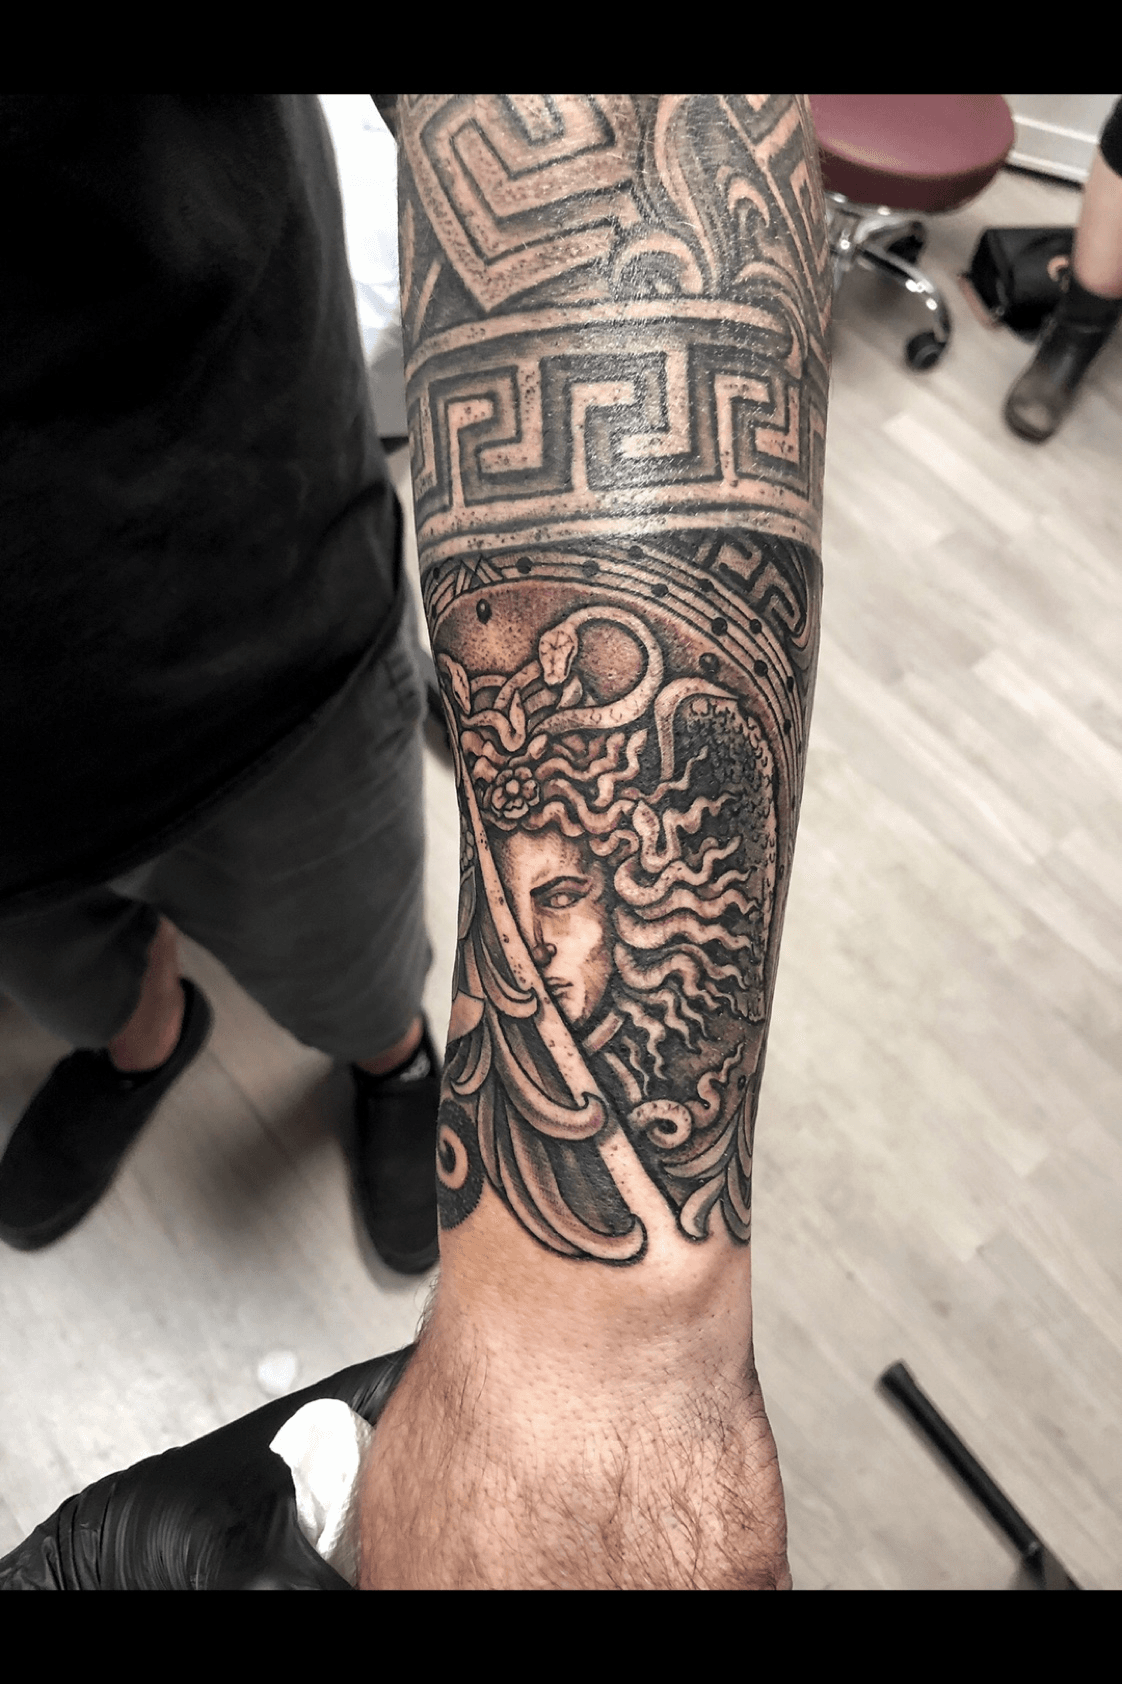 Hades by me at Ascension Tattoo in Albuquerque NM Face is healed the  rest is fresh  rtattoo